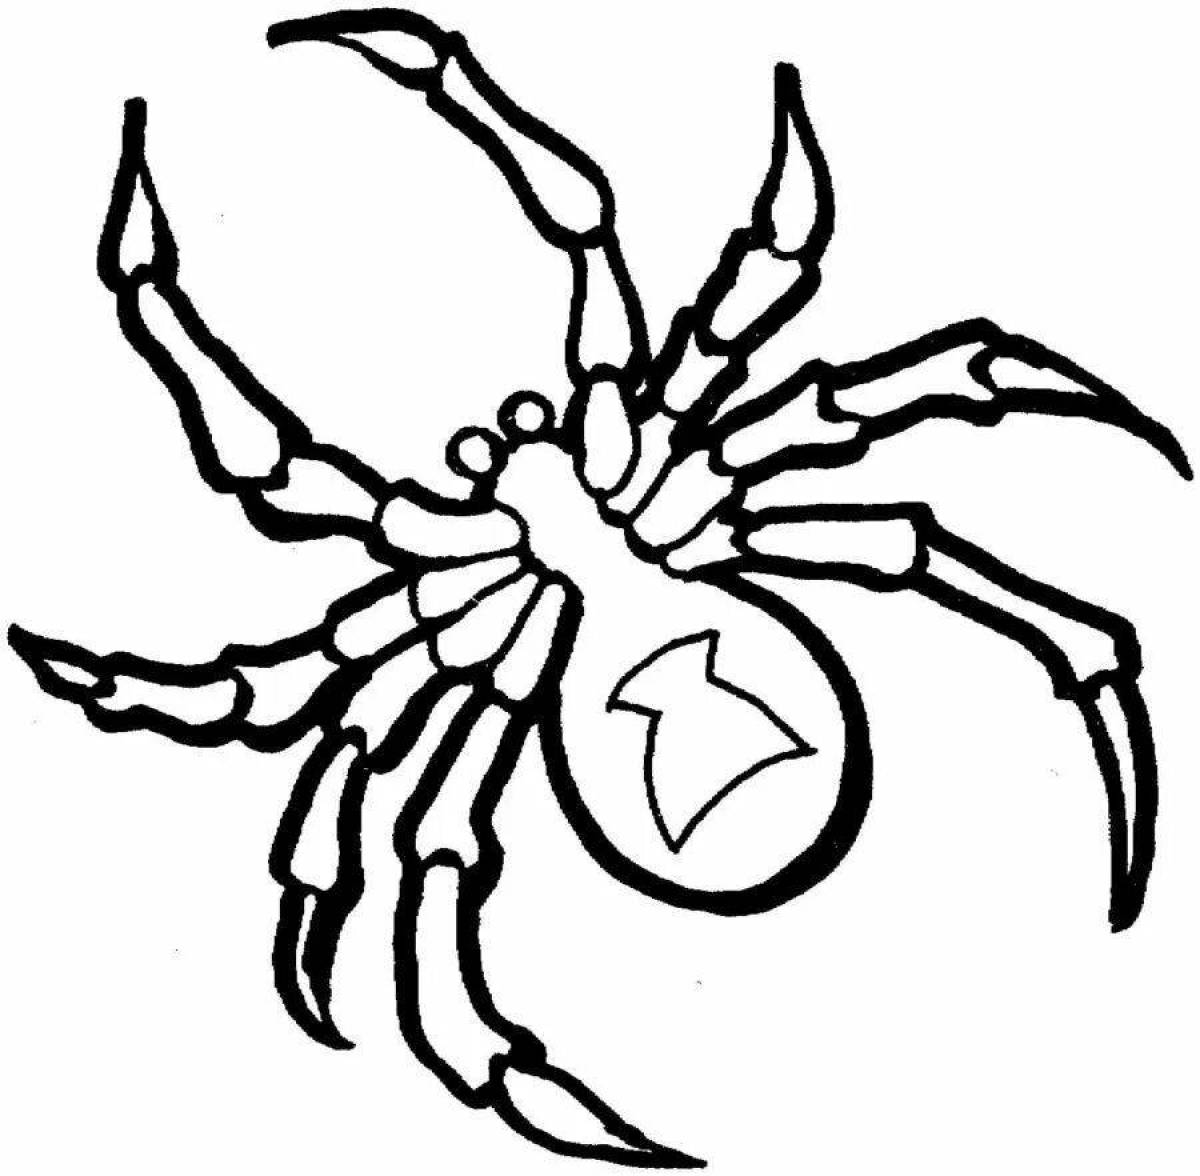 Intriguing black widow spider coloring book